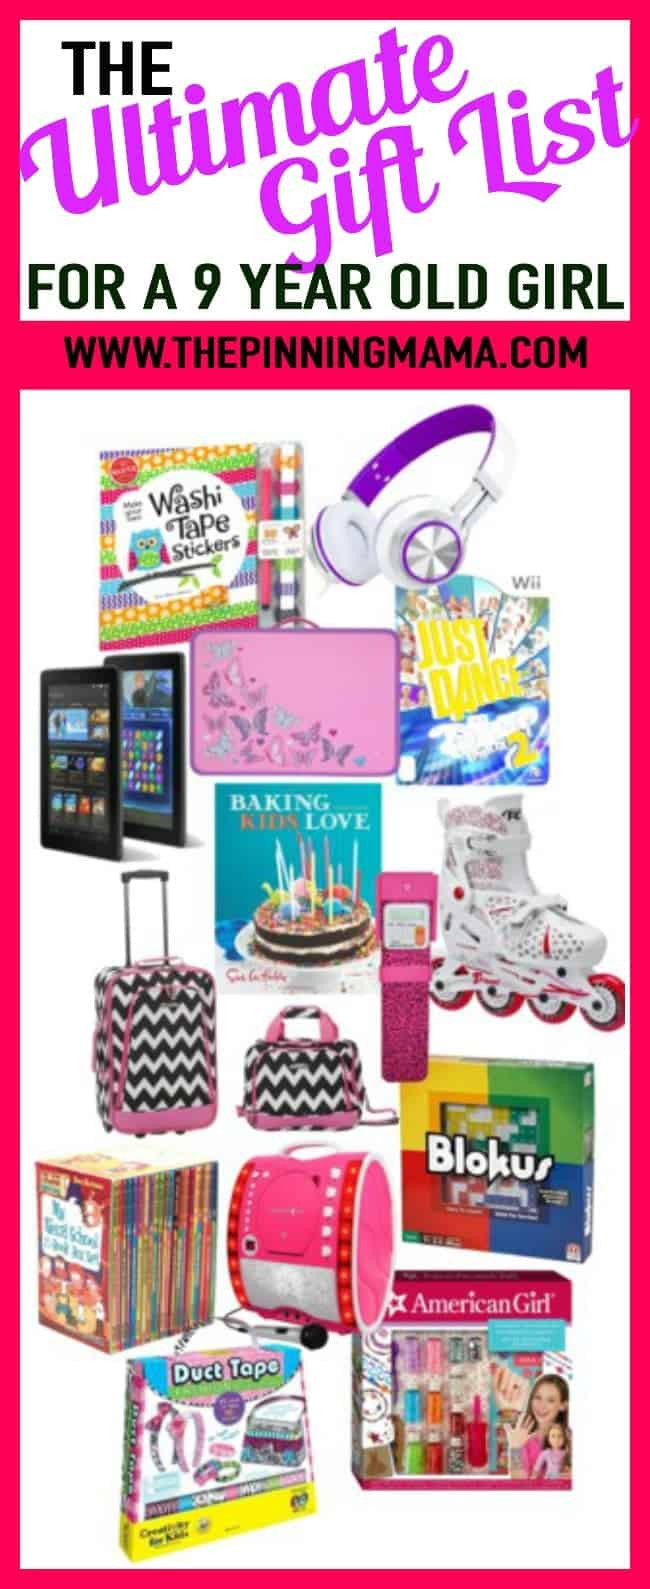 Christmas Gift Ideas For 9 Year Old Girl
 The Ultimate Gift List for a 9 Year Old Girl